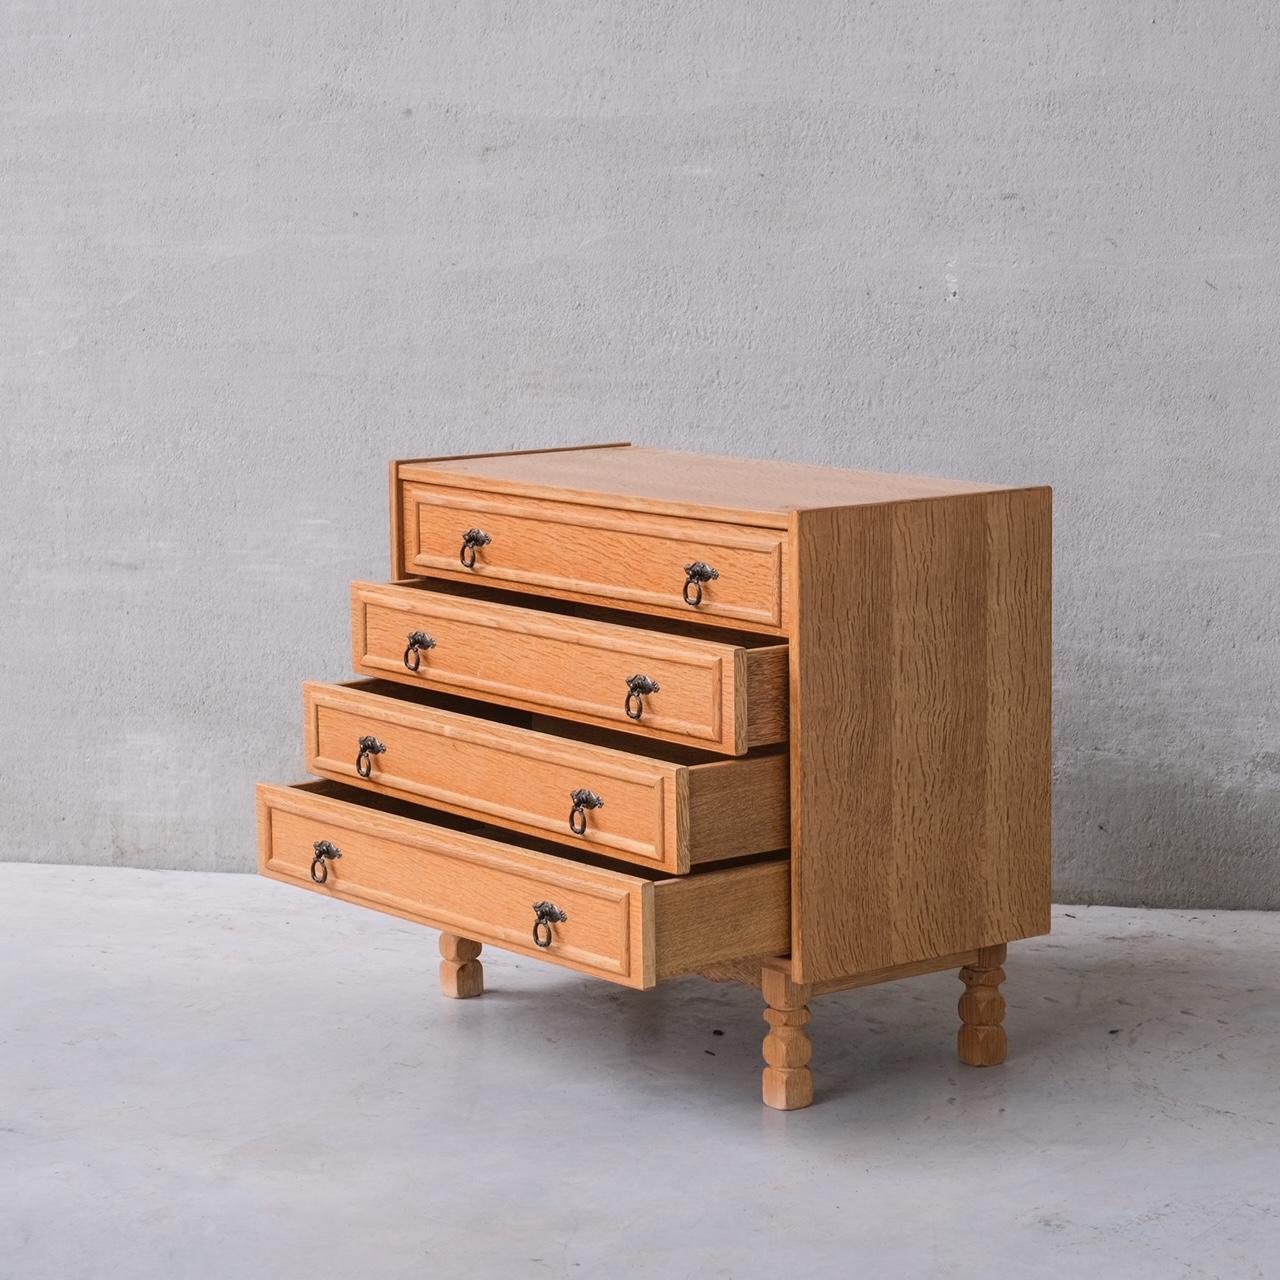 Oak Danish Mid-Century Chest of Drawers in manner of Kjaernulf In Good Condition For Sale In London, GB